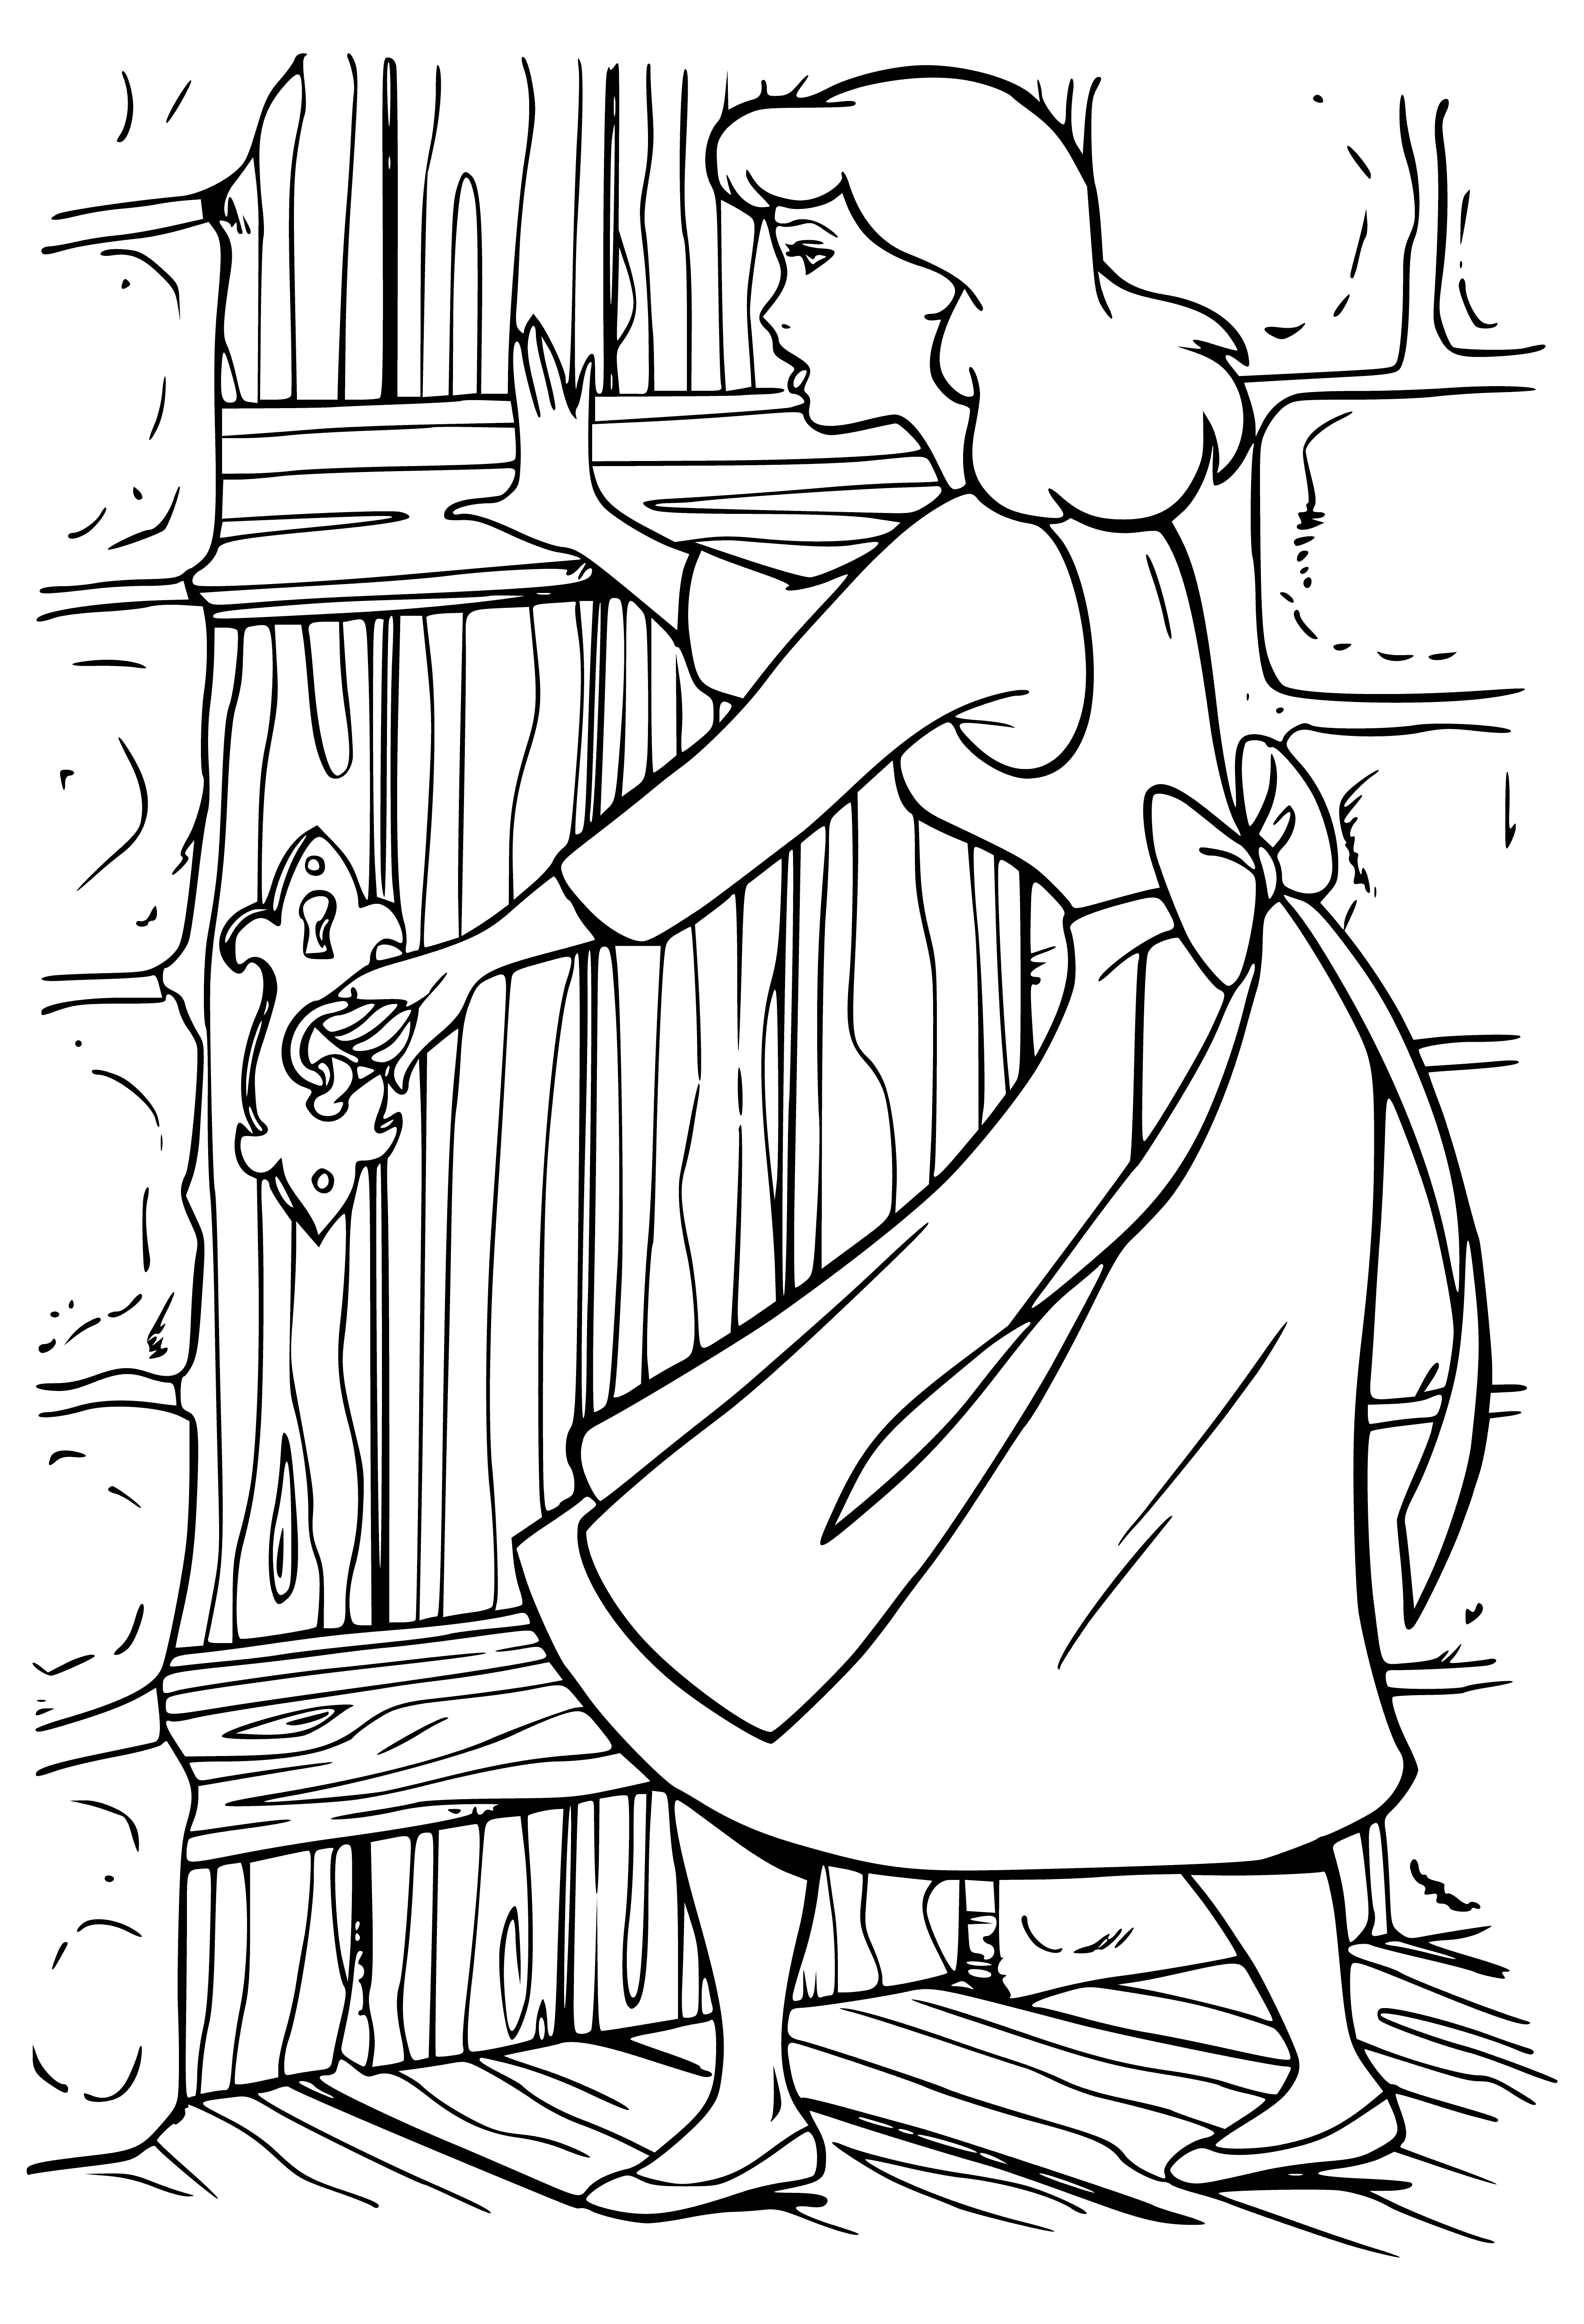 coloring page: Cinderella is locked alone, in the dark, scared and sad. Only a small window above brings light.